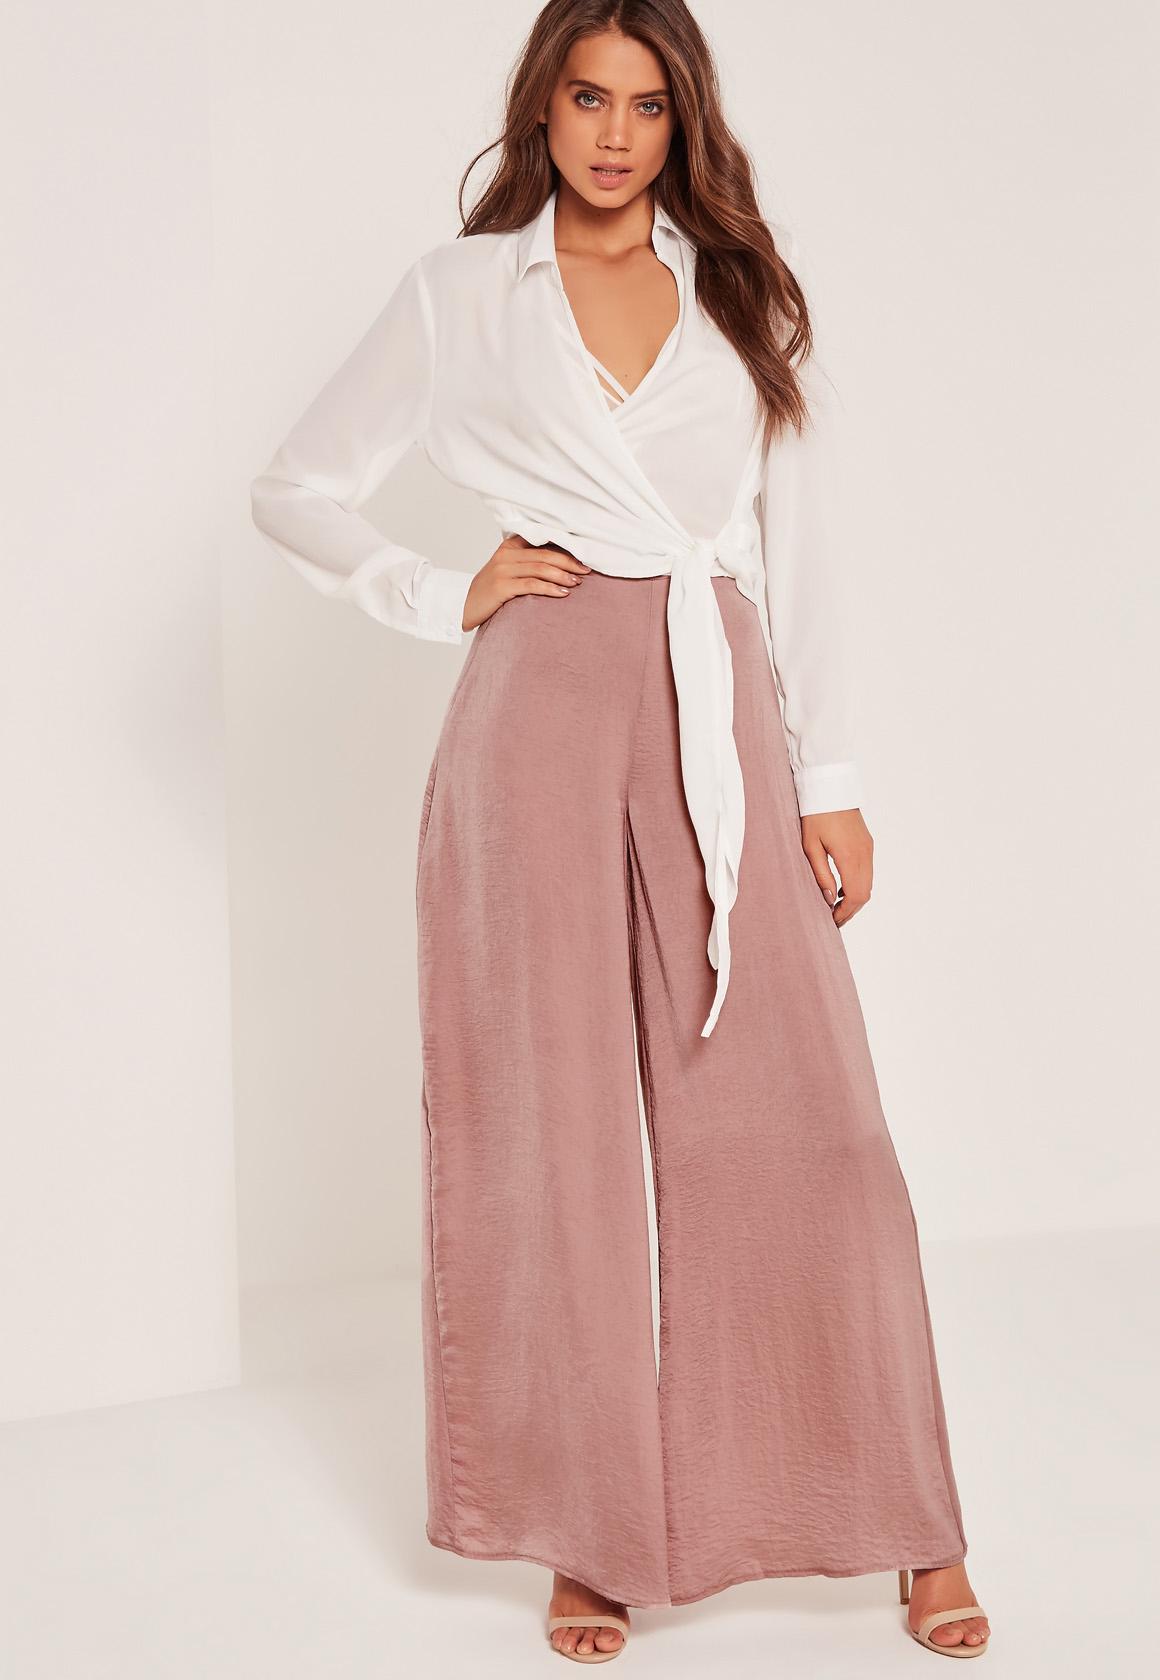 How to shop for palazzo trousers